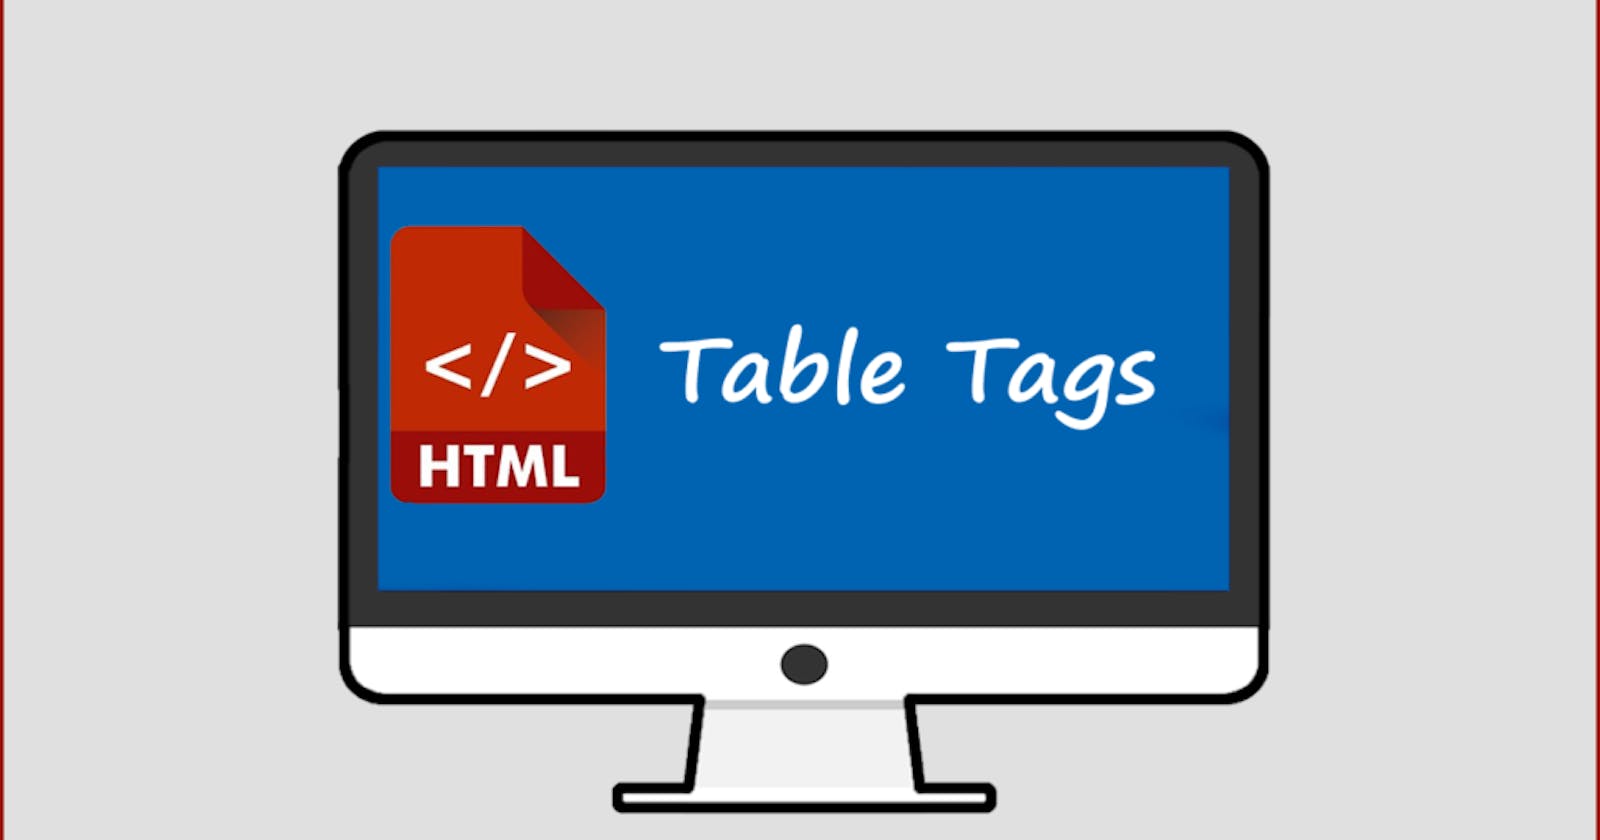 A glimpse of HTML Tables